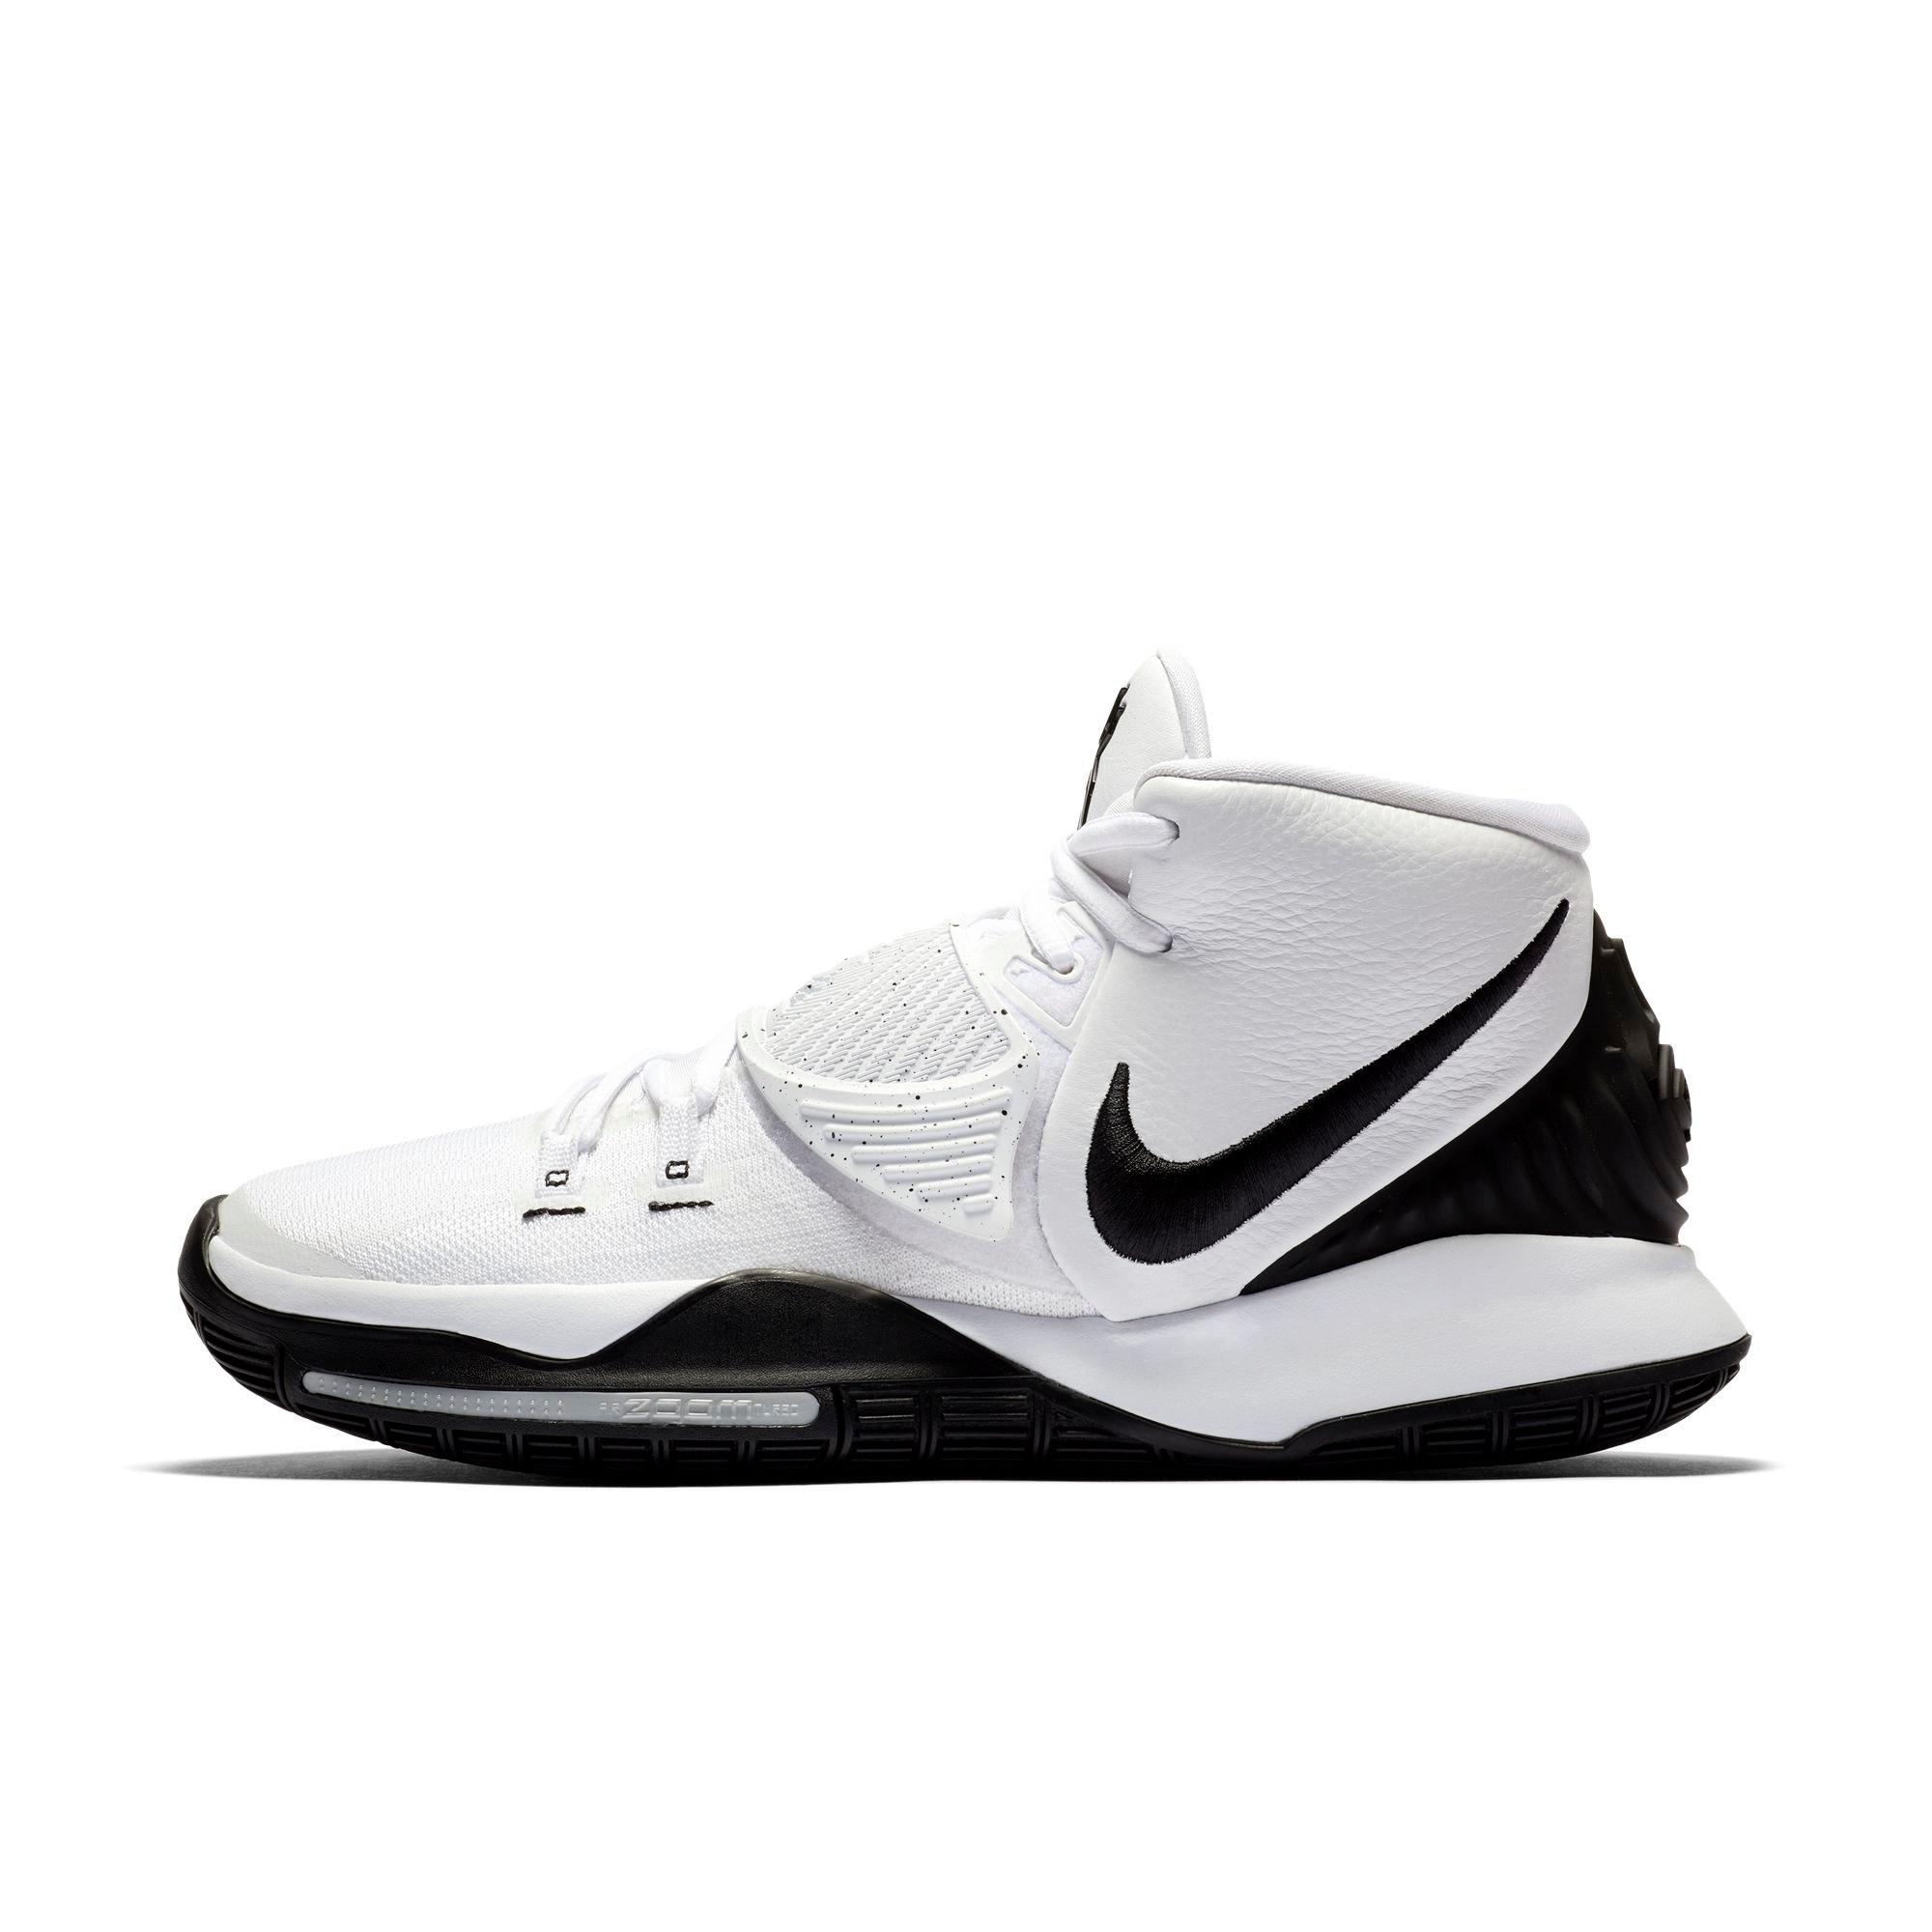 kyrie irving shoes all white